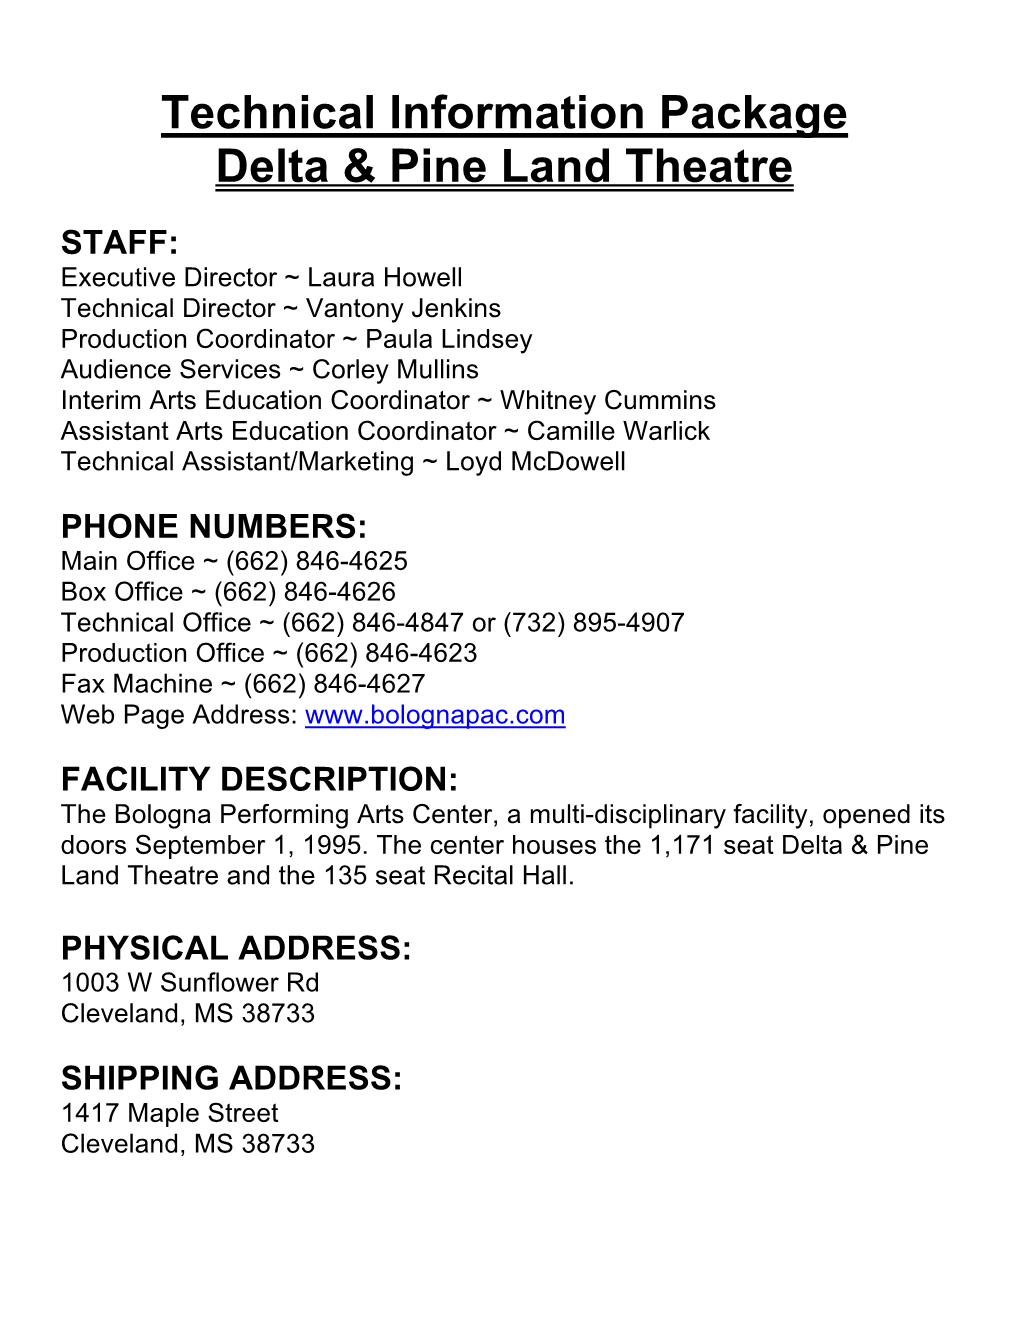 Technical Information Package Delta & Pine Land Theatre